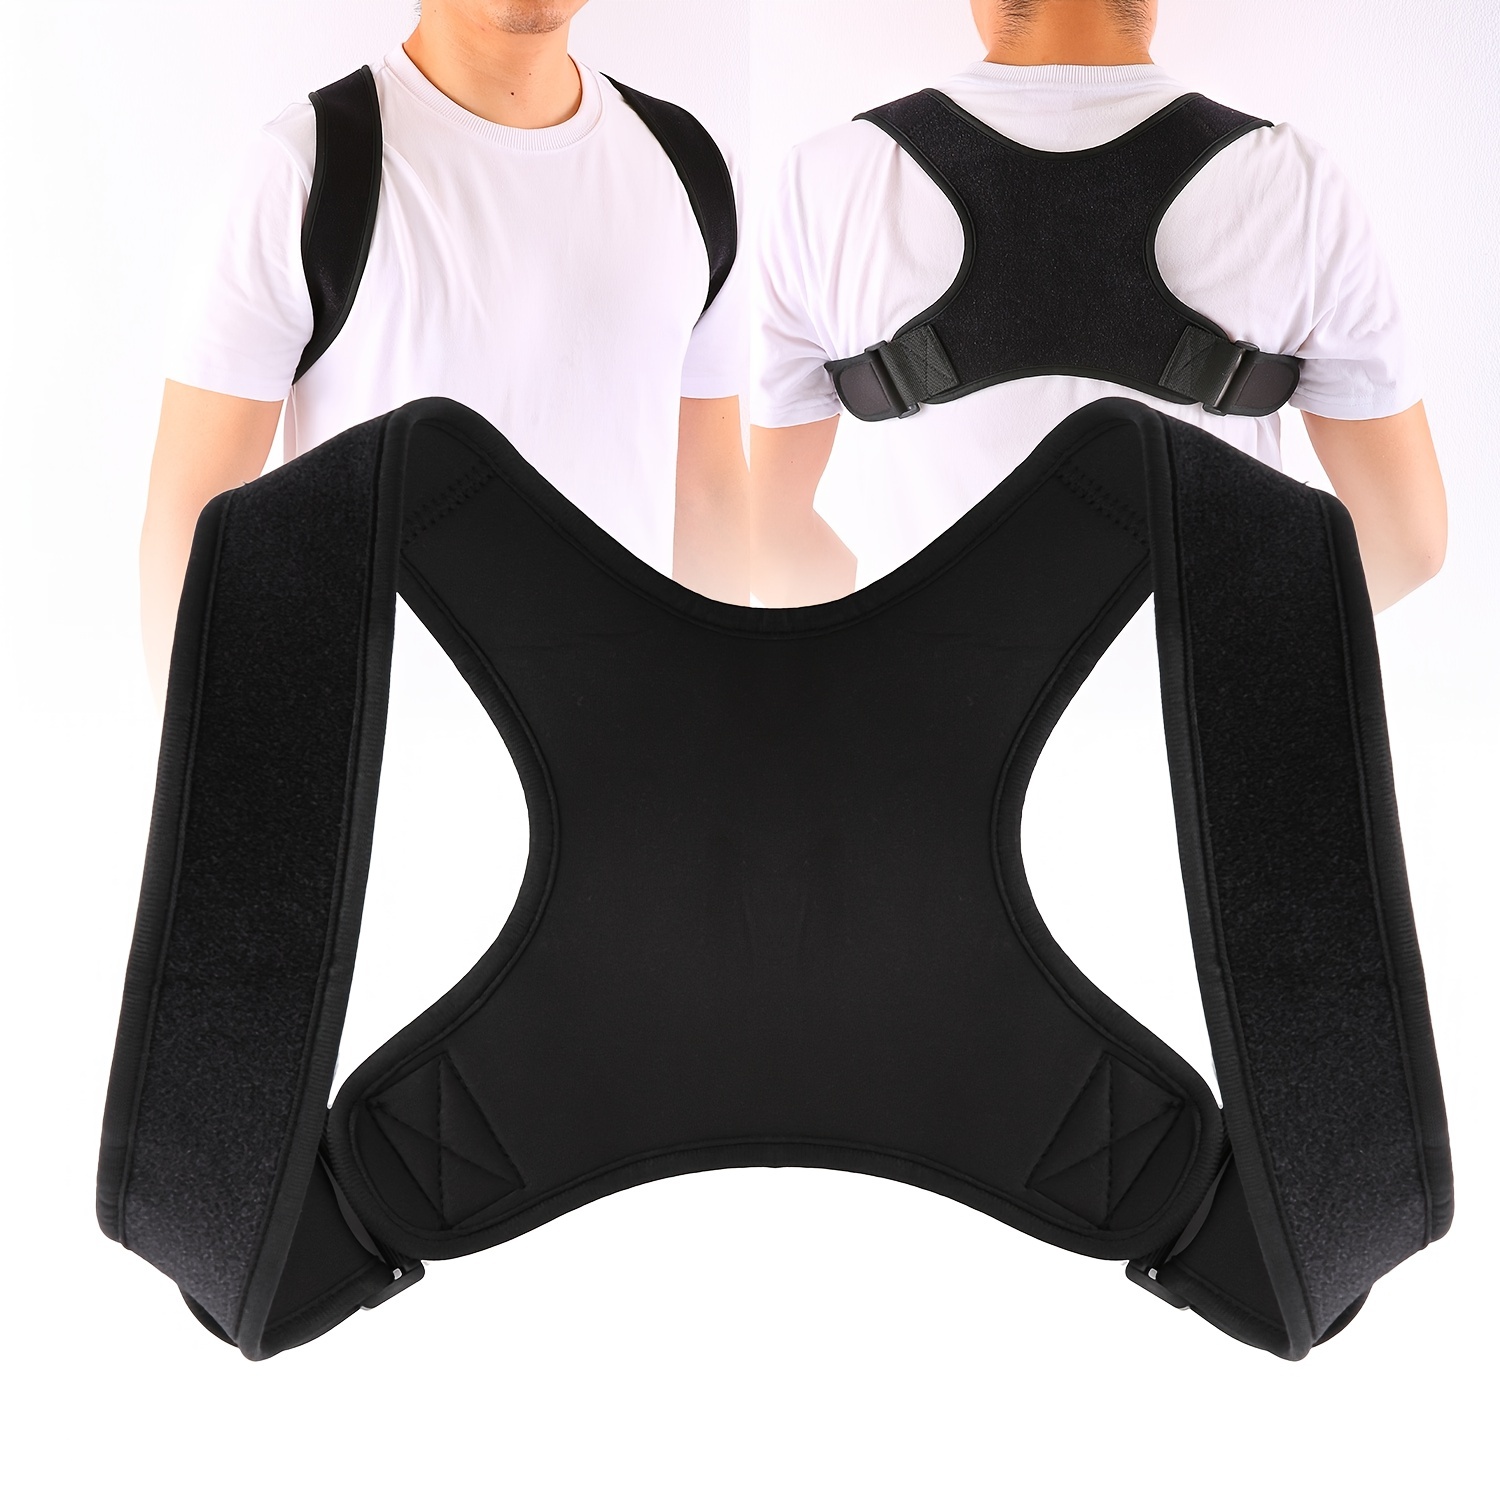 

Adjustable Posture Corrector For Men And Women, Improve Kyphosis And Straighten Spine